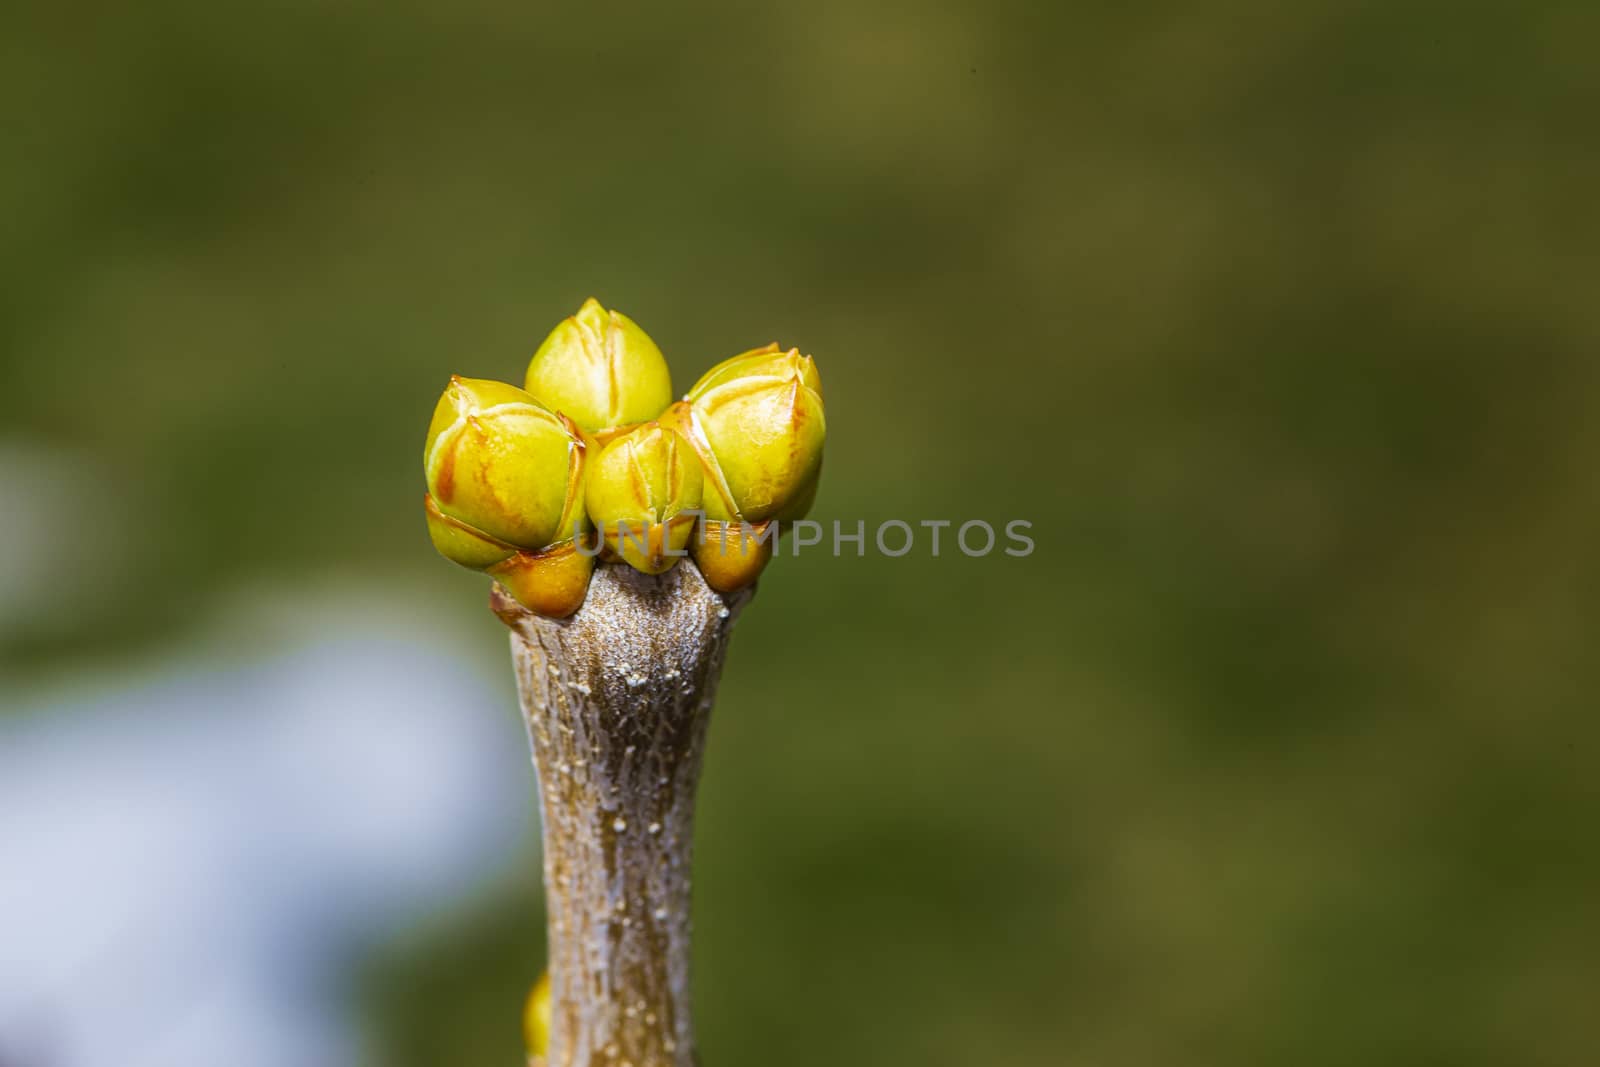 Early lilac buds by mypstudio